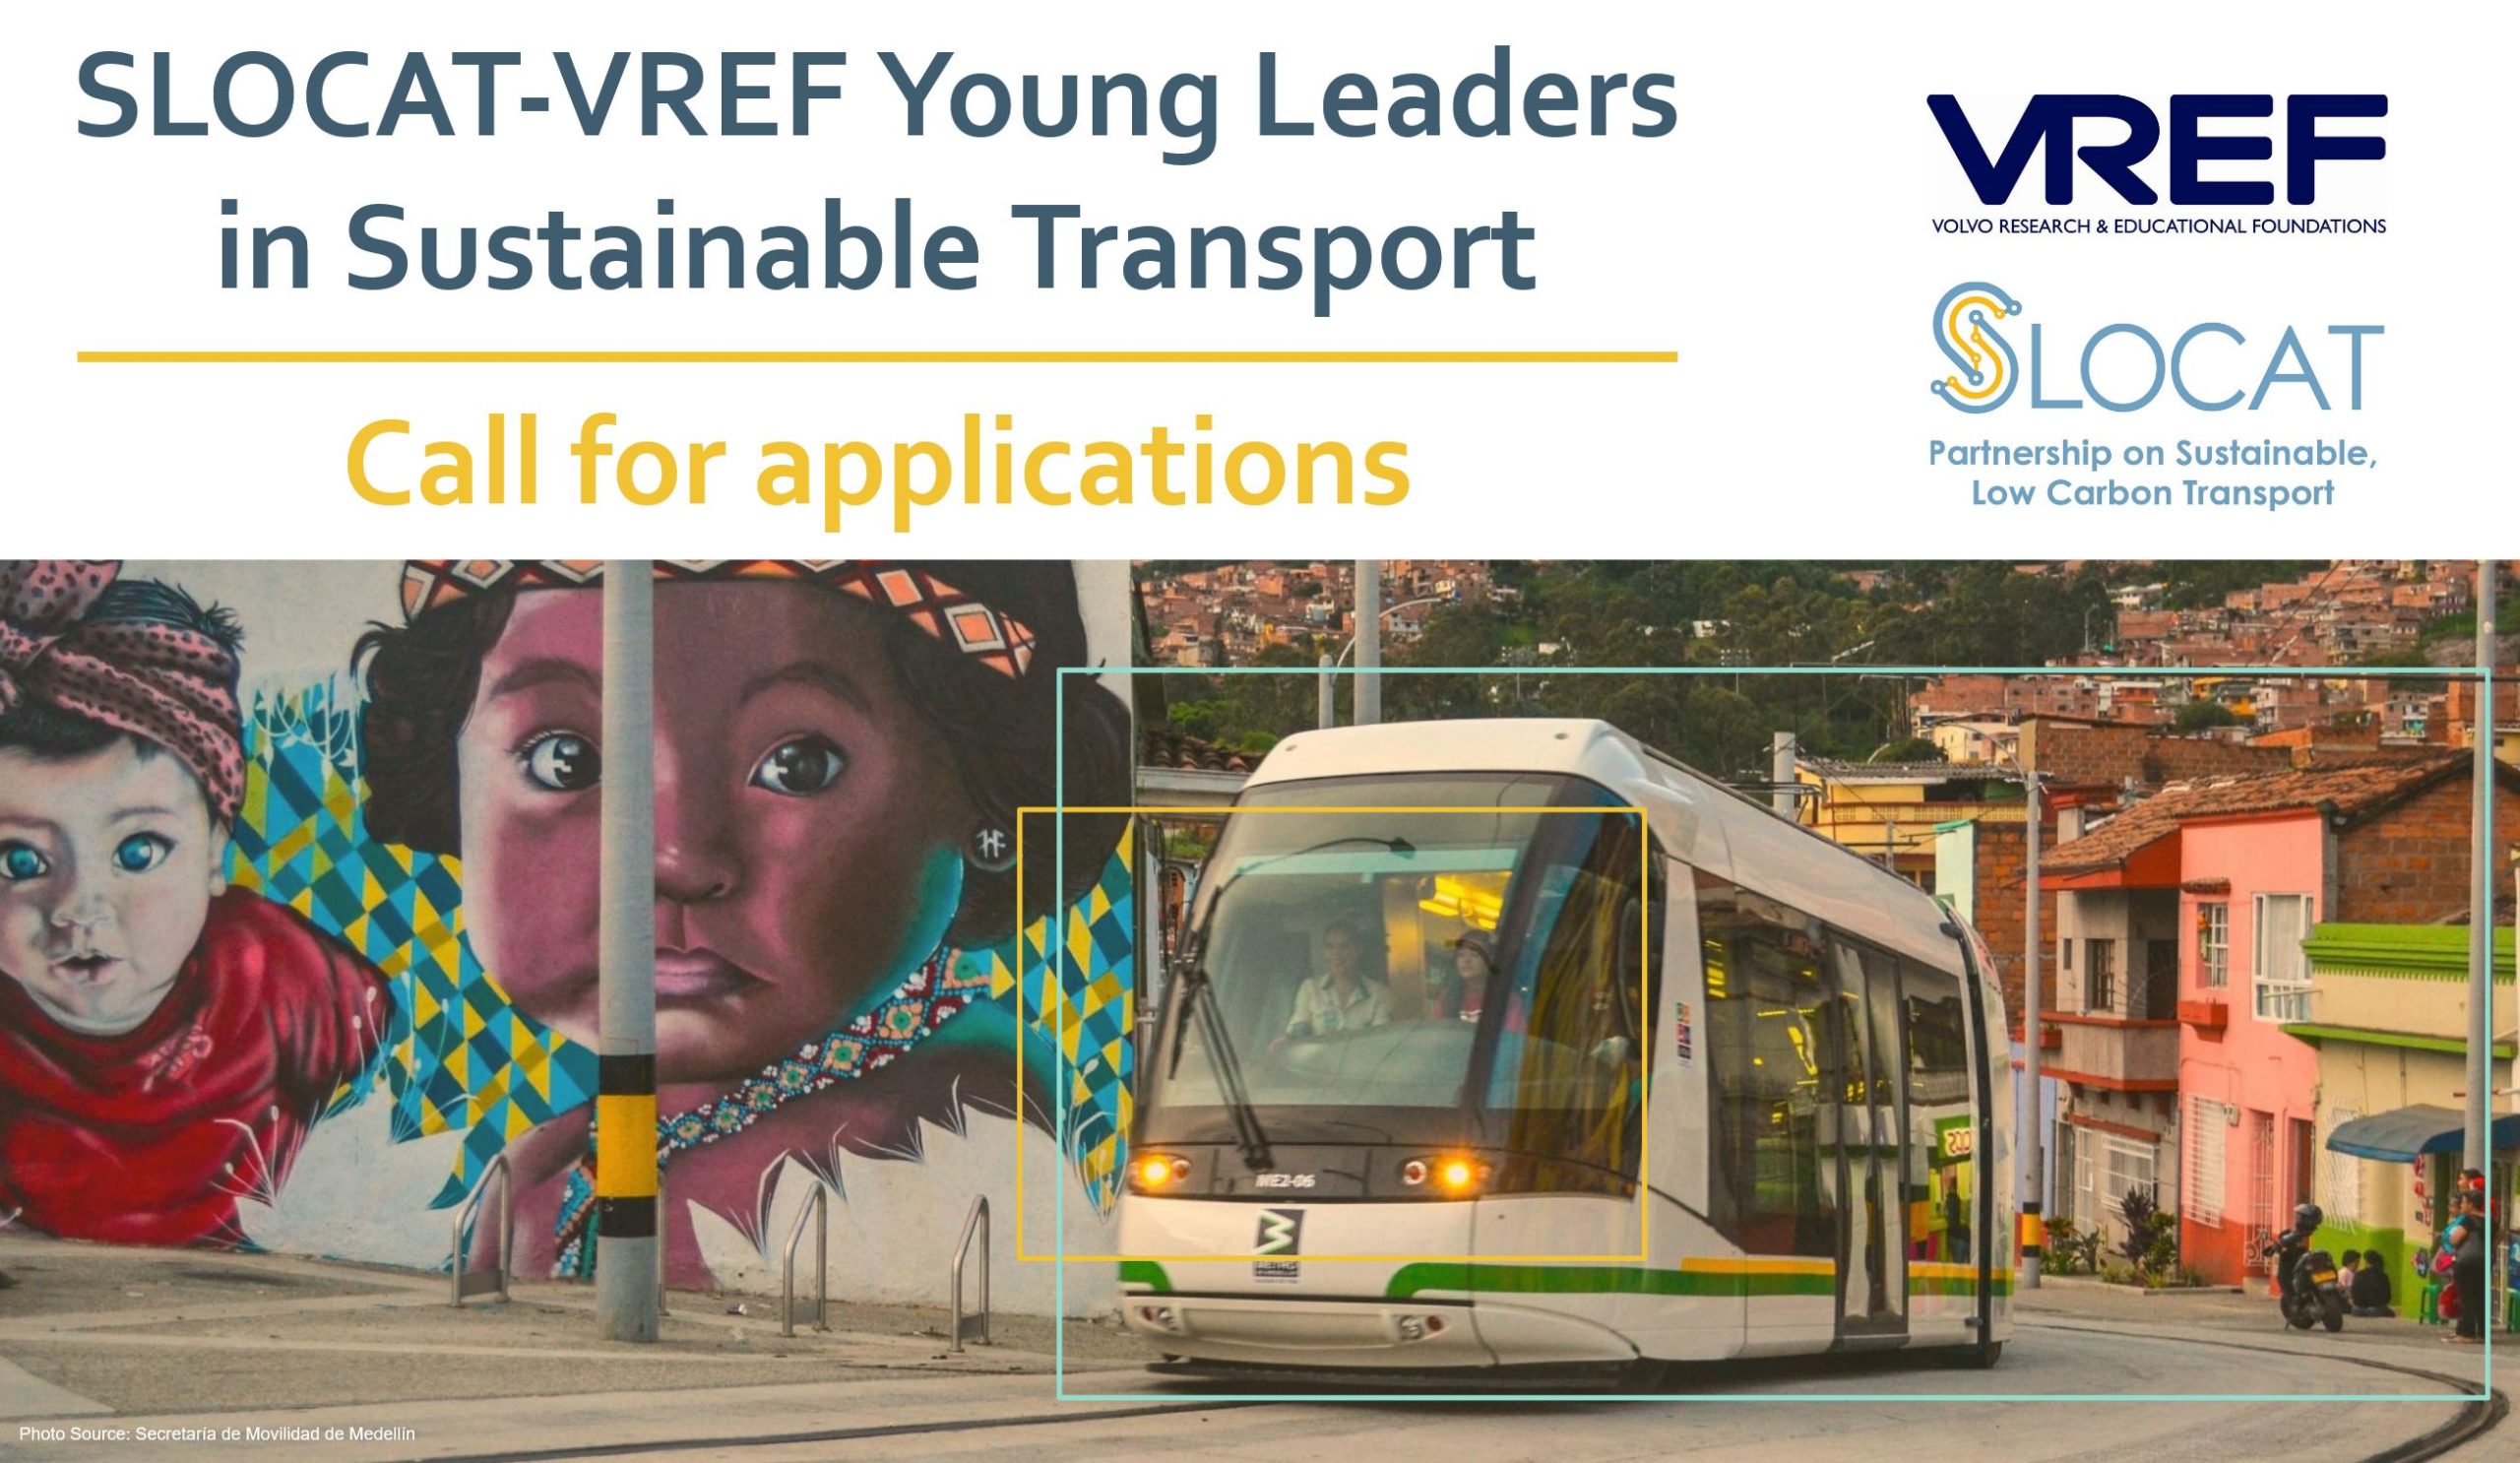 Call for Applications for SLOCAT-VREF Young Leaders in Sustainable Transport programme